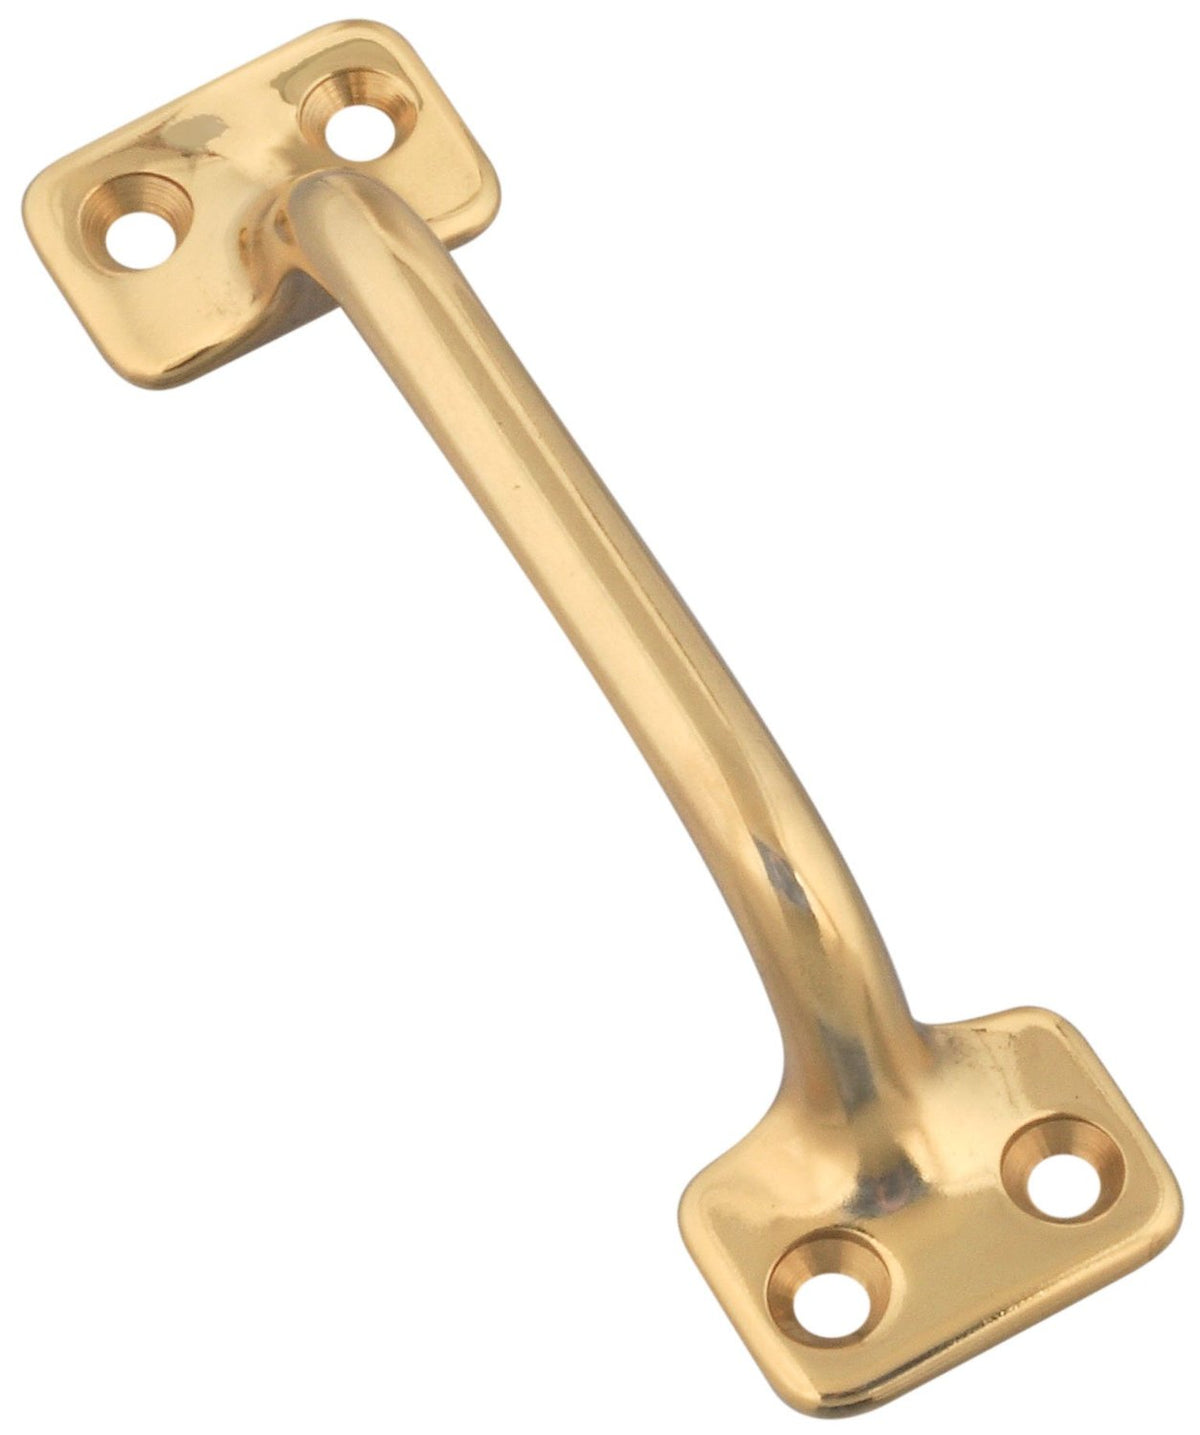 National Hardware® N216-085 Sash Lift with Screws, 4", Polished Solid Brass